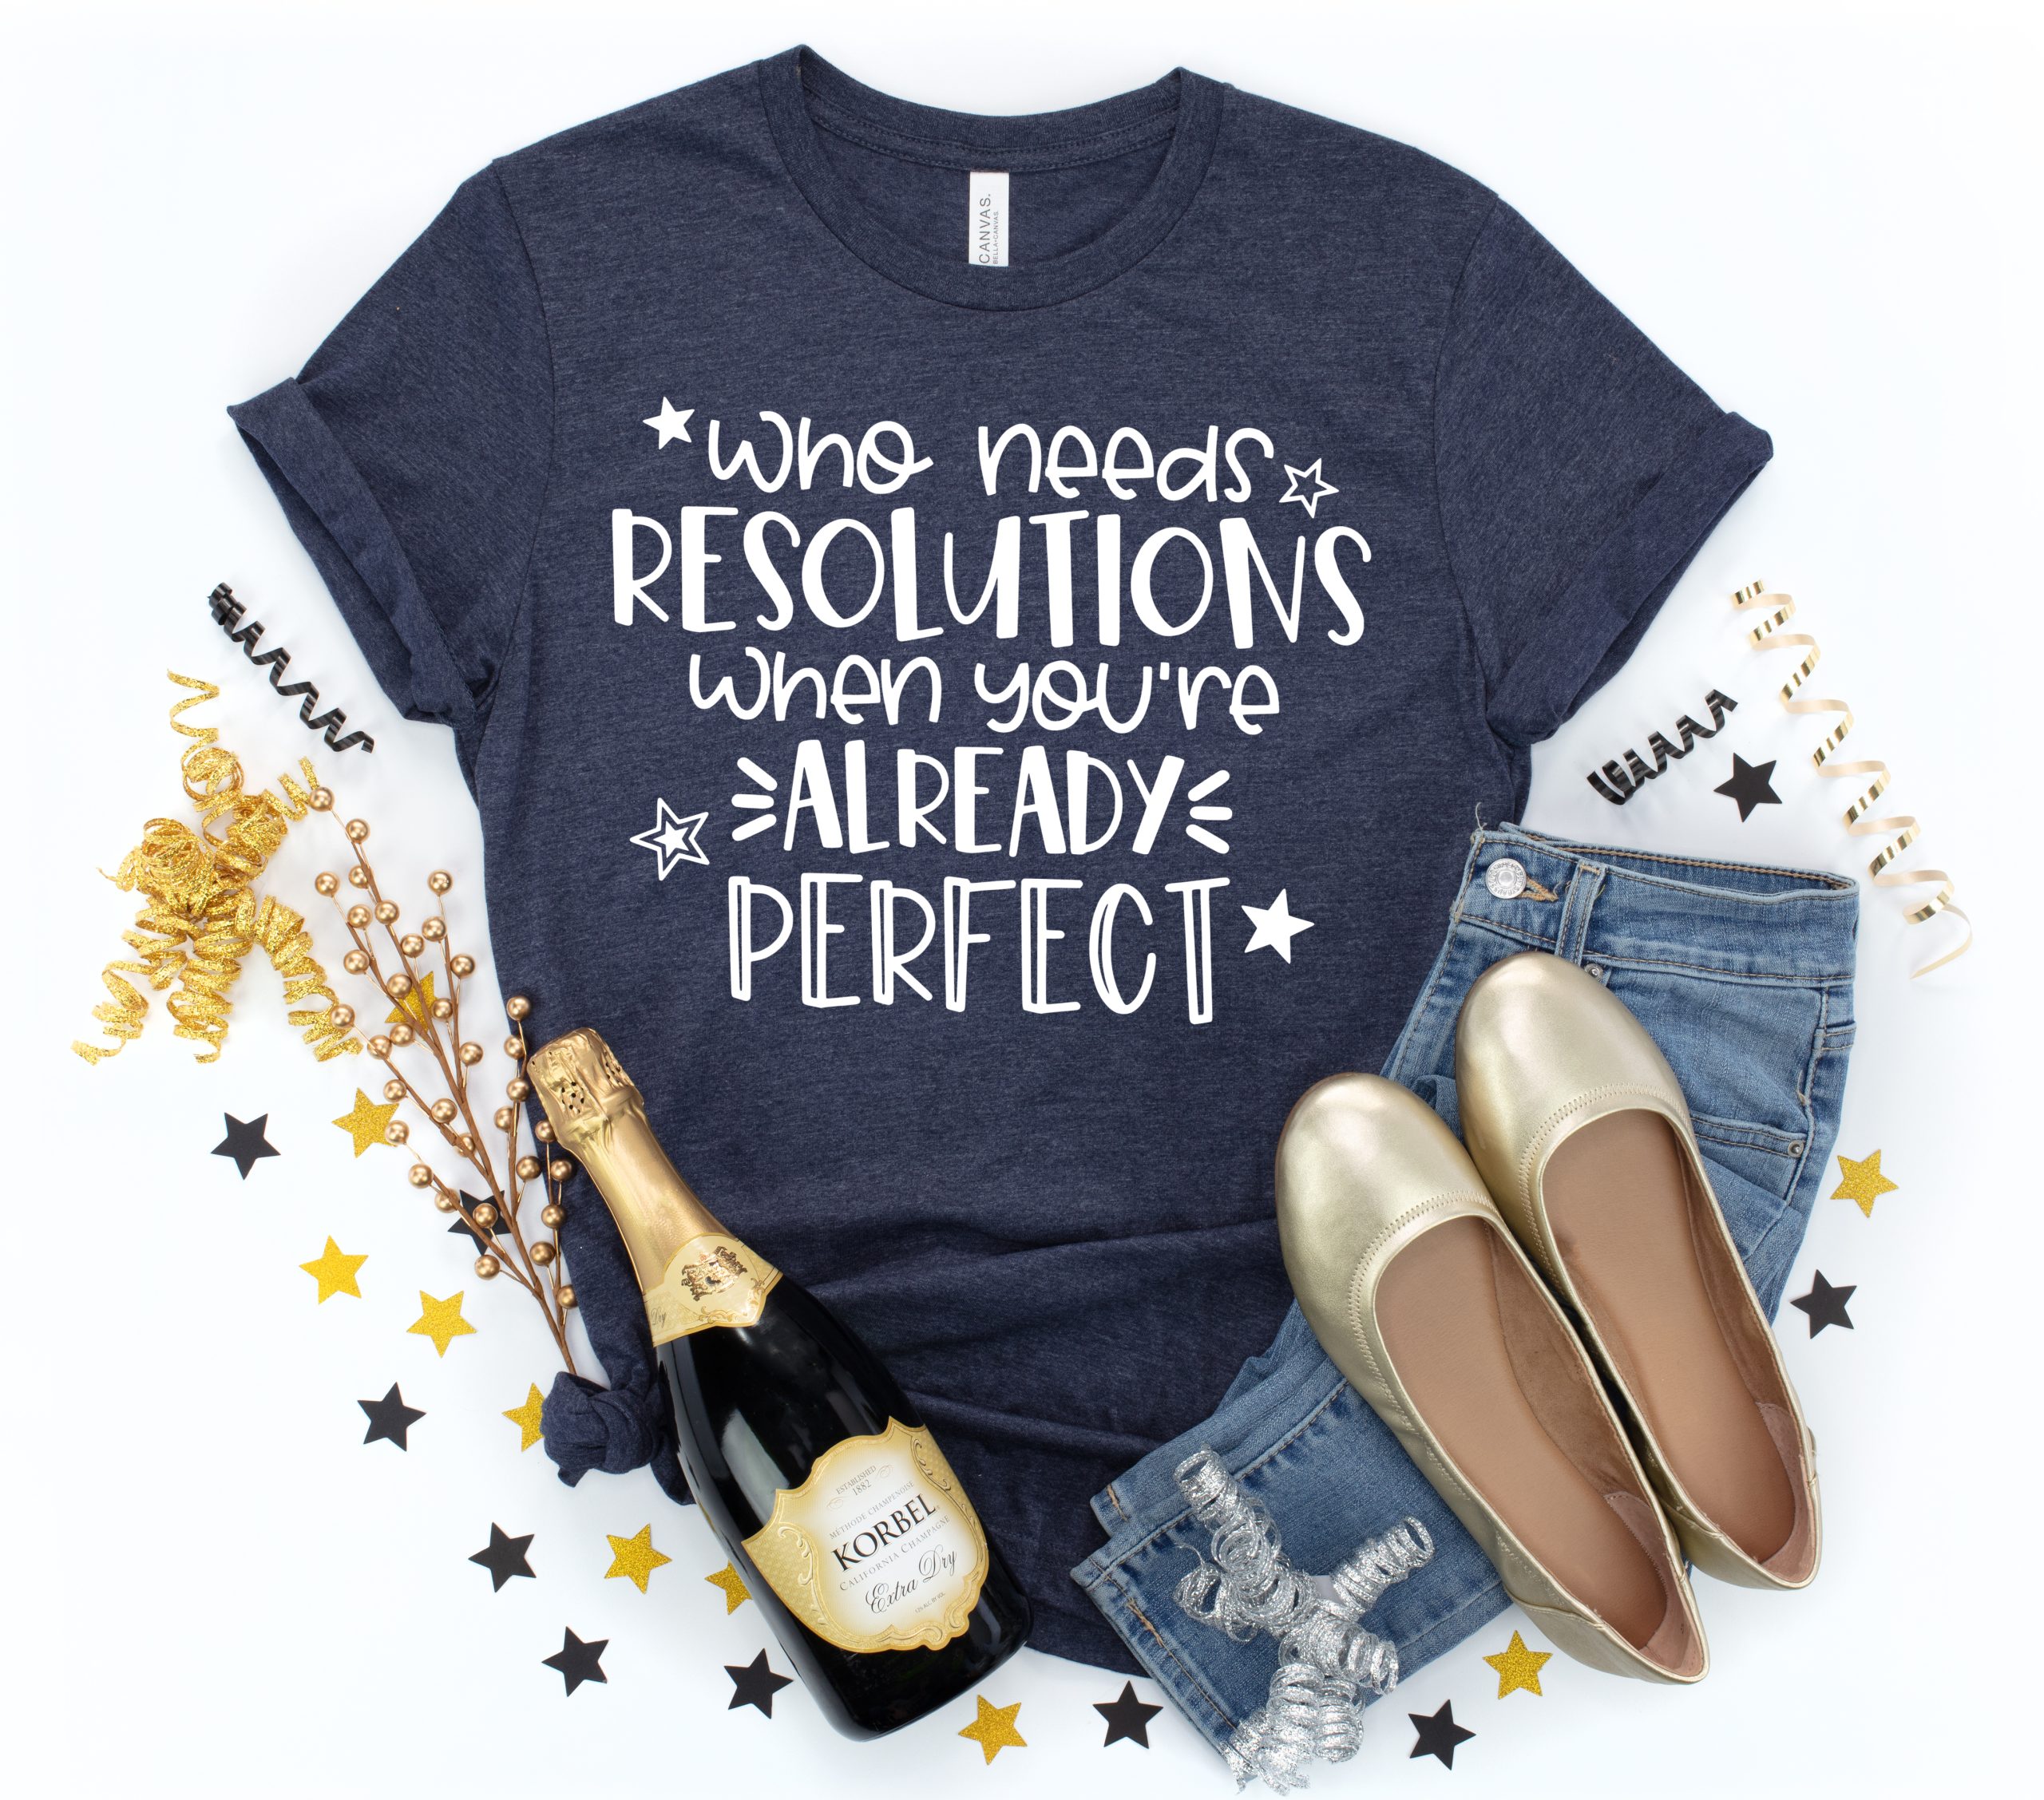 Who Needs Resolutions - Free New Year's Eve Cut File